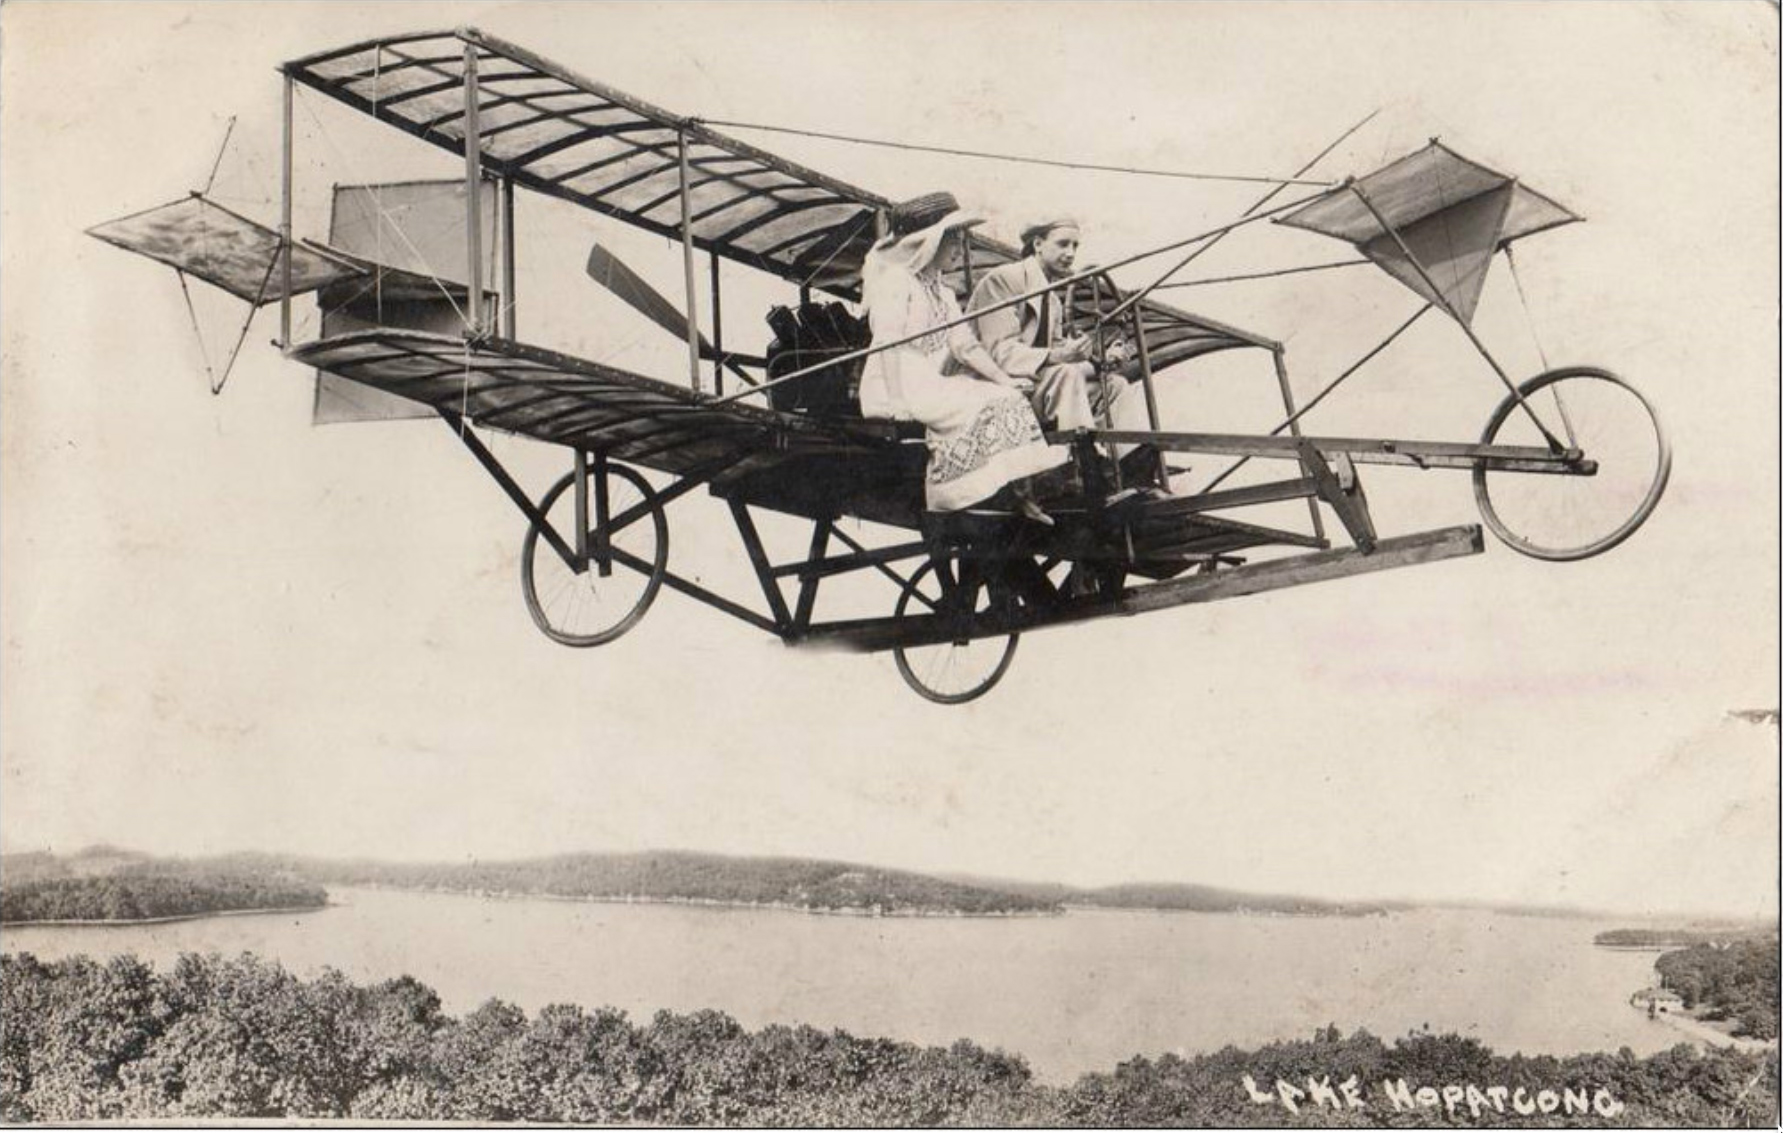 Lake Hopatcong - Looks like some high flying special effects fun - Harris - c 1910